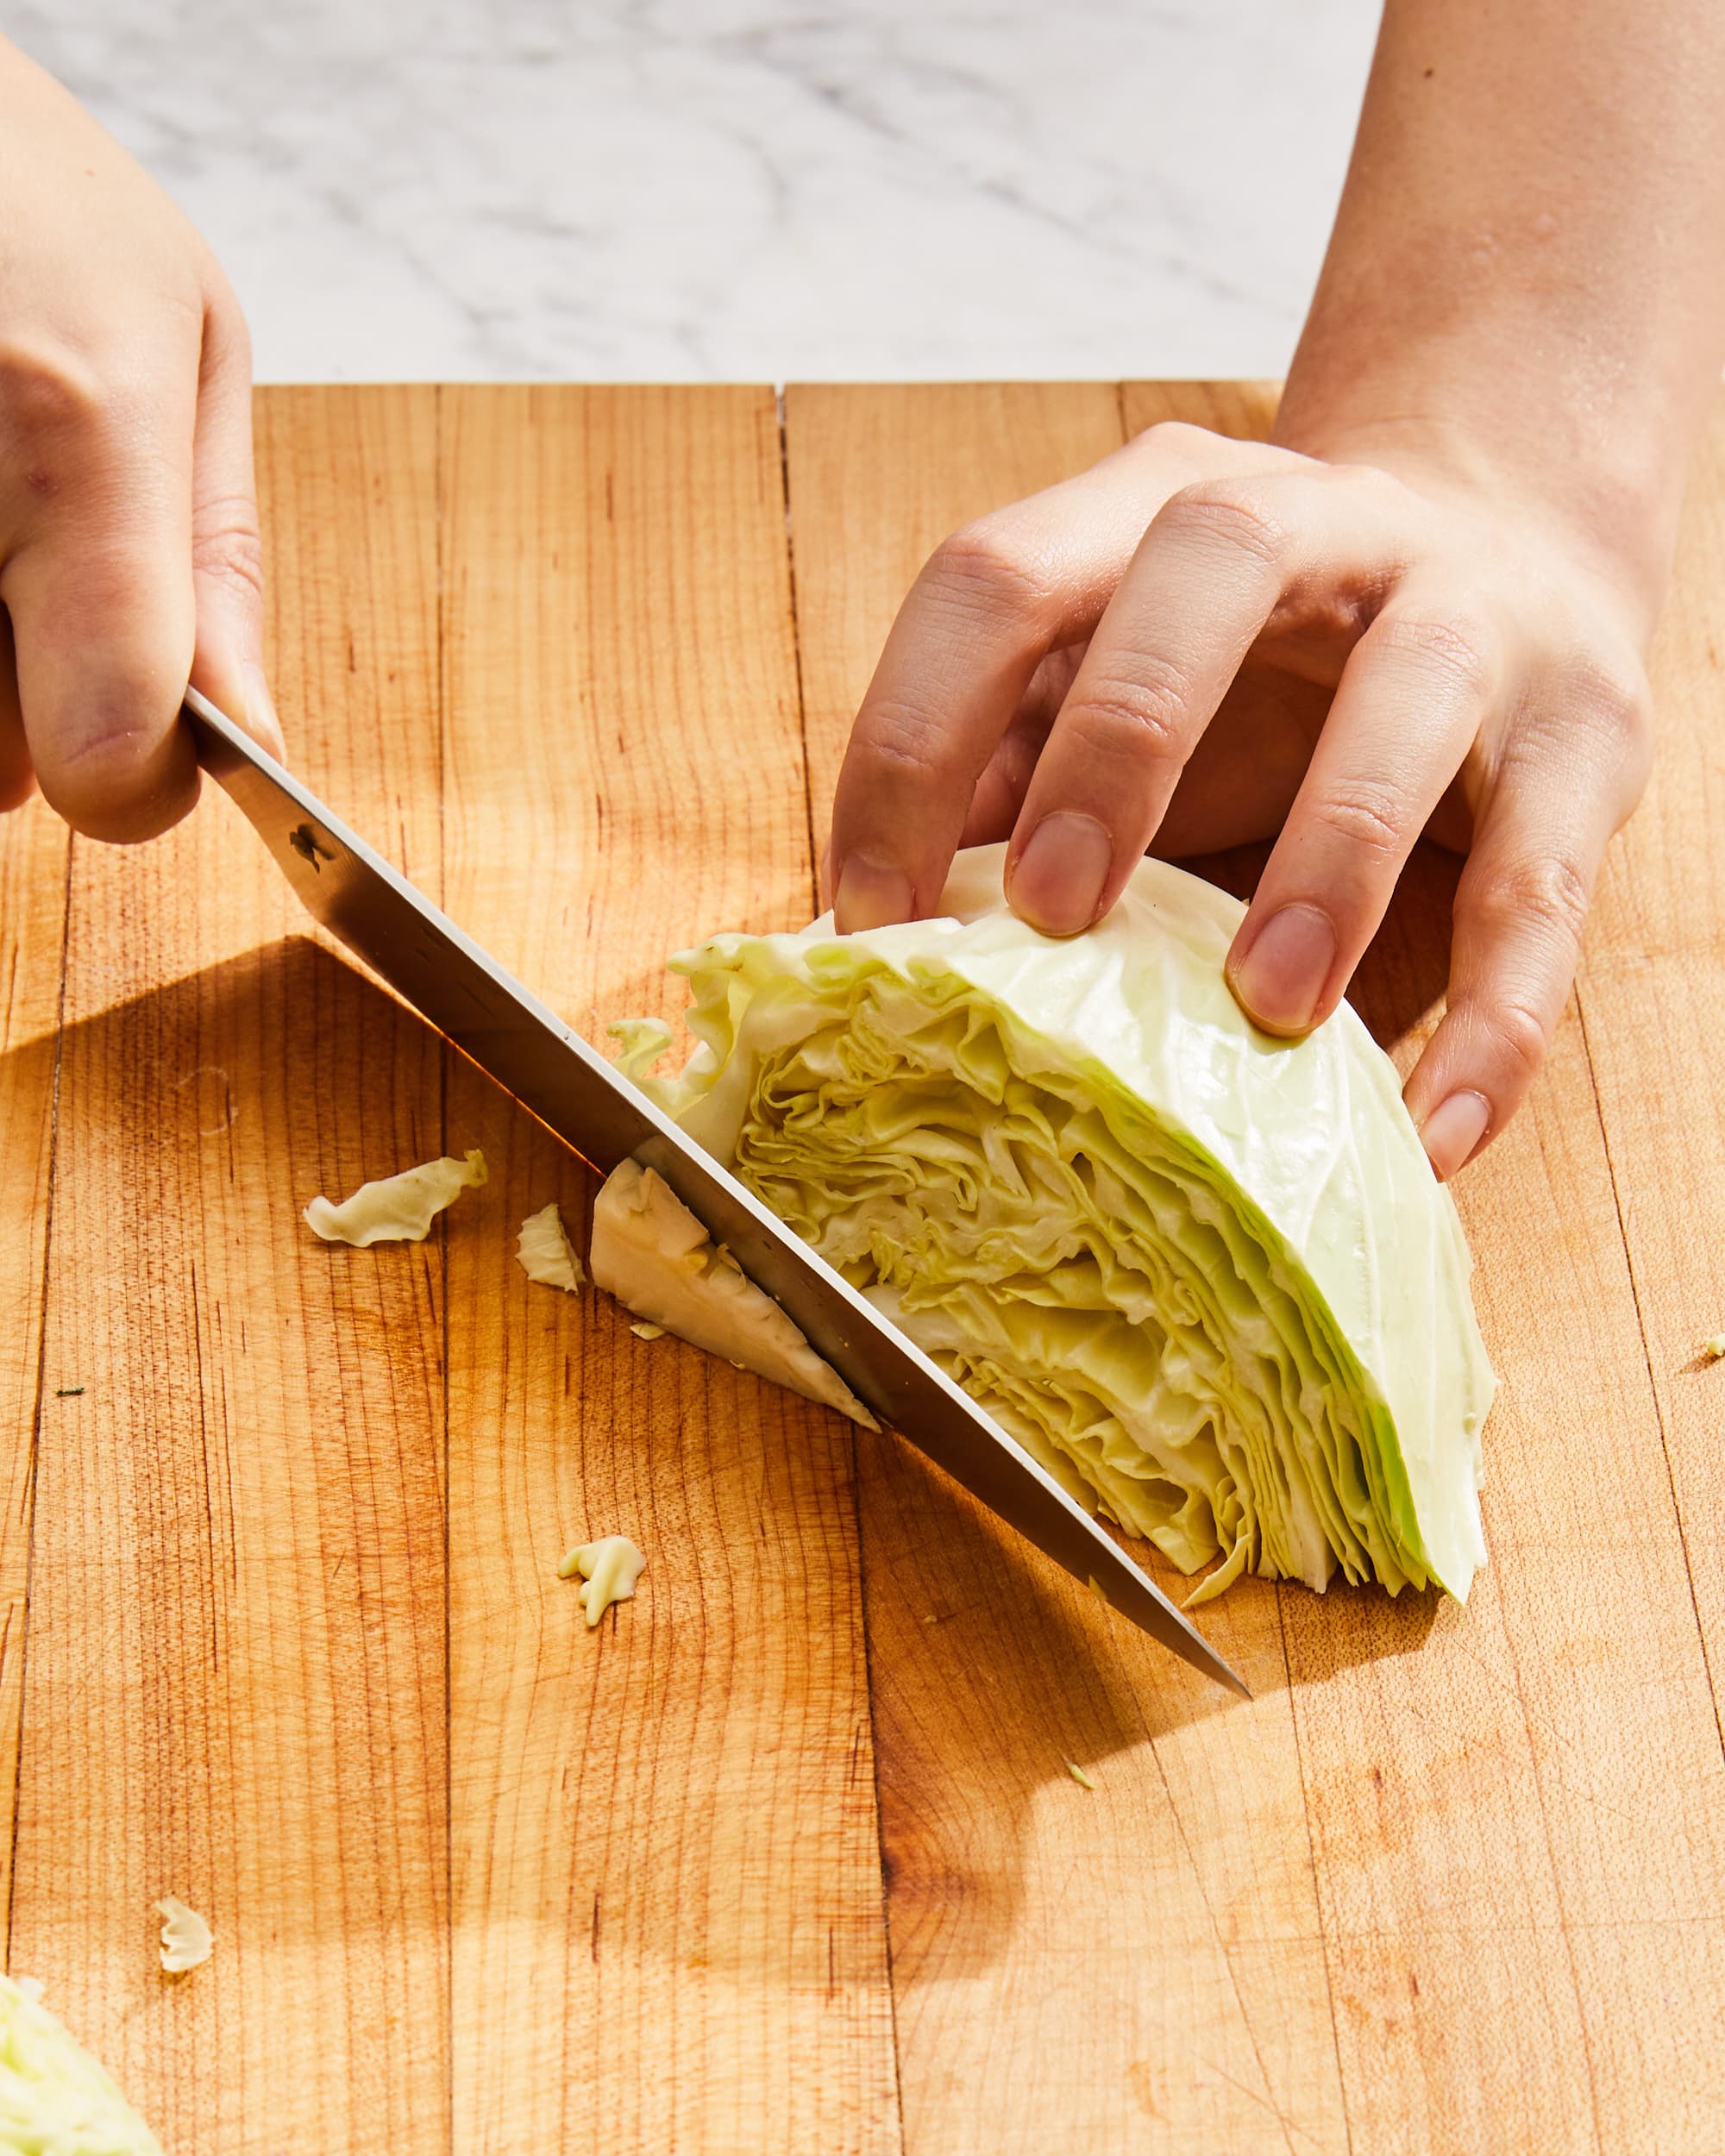 How to Cut Cabbage, Step by Step